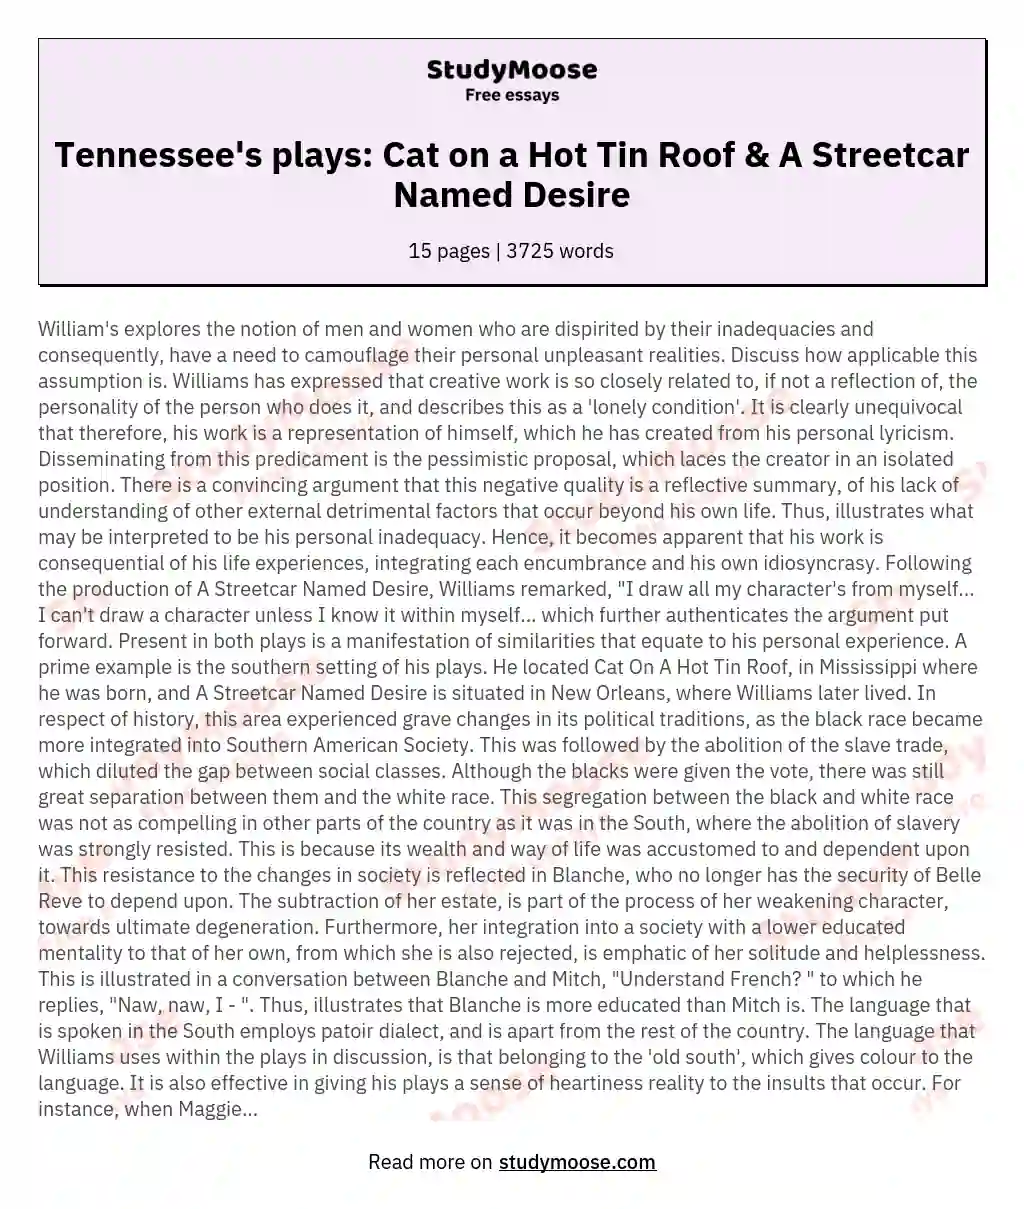 Tennessee's plays: Cat on a Hot Tin Roof & A Streetcar Named Desire essay